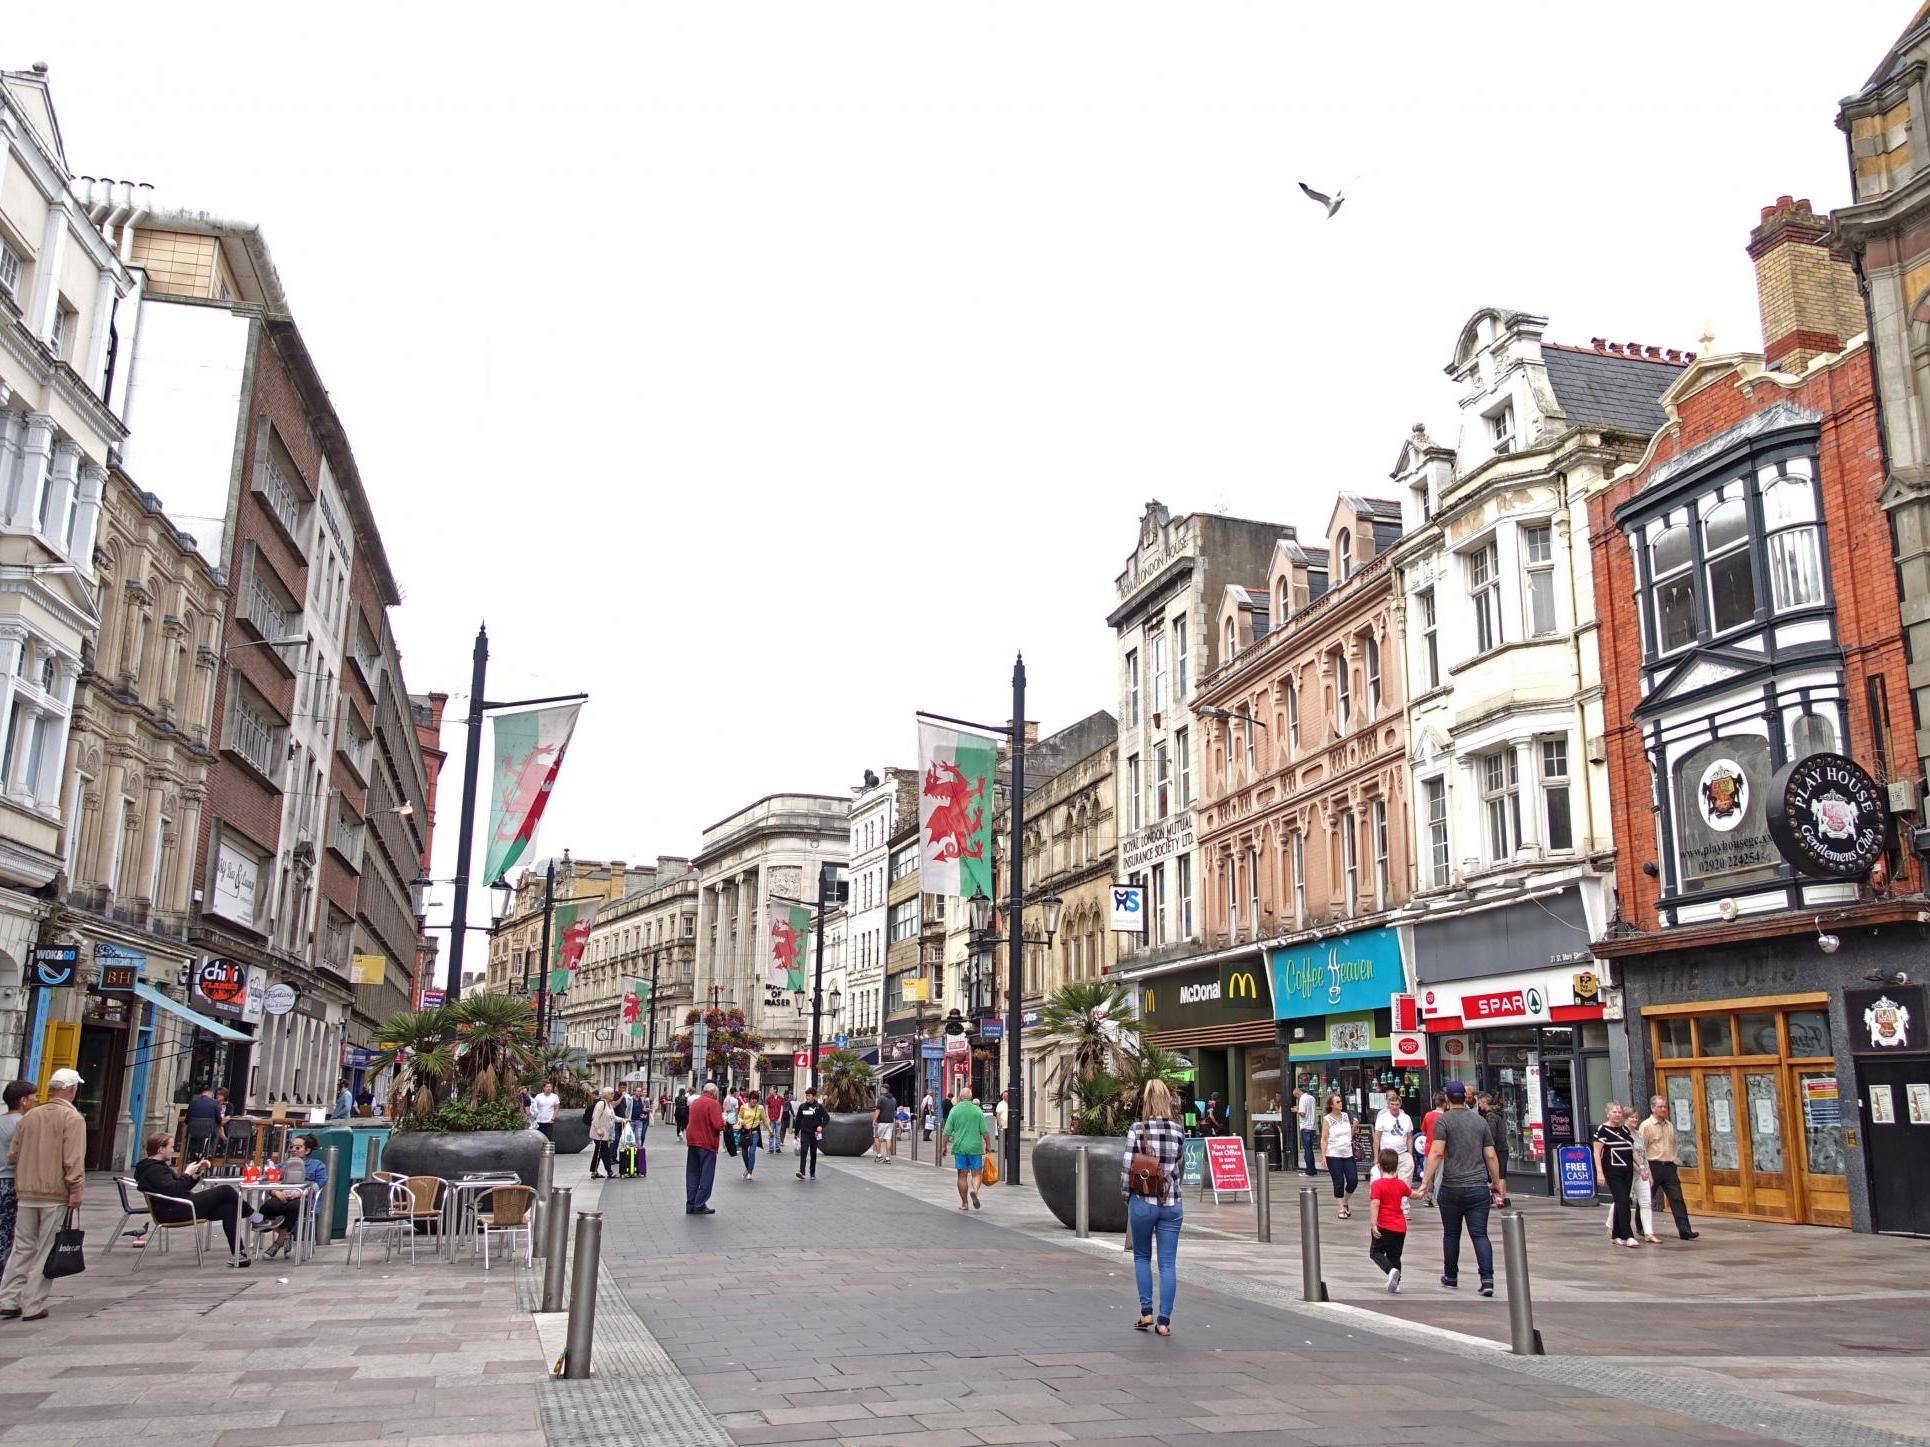 Police were called to reports of an assault in St Mary's Street, Cardiff